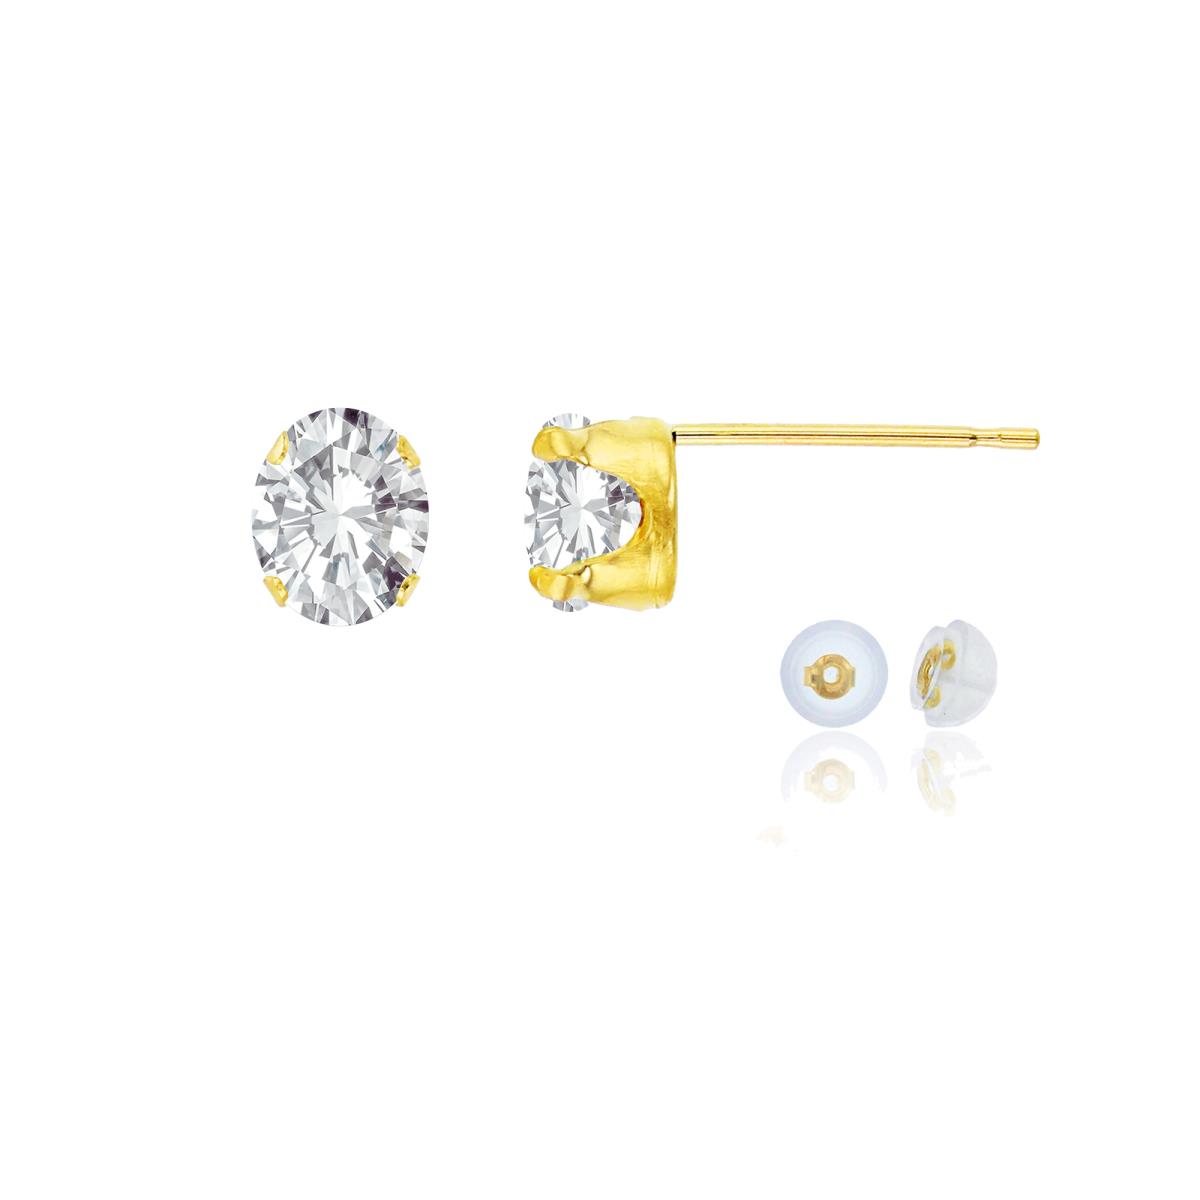 14K Yellow Gold 6x4mm Oval White Topaz Stud Earring with Silicone Back